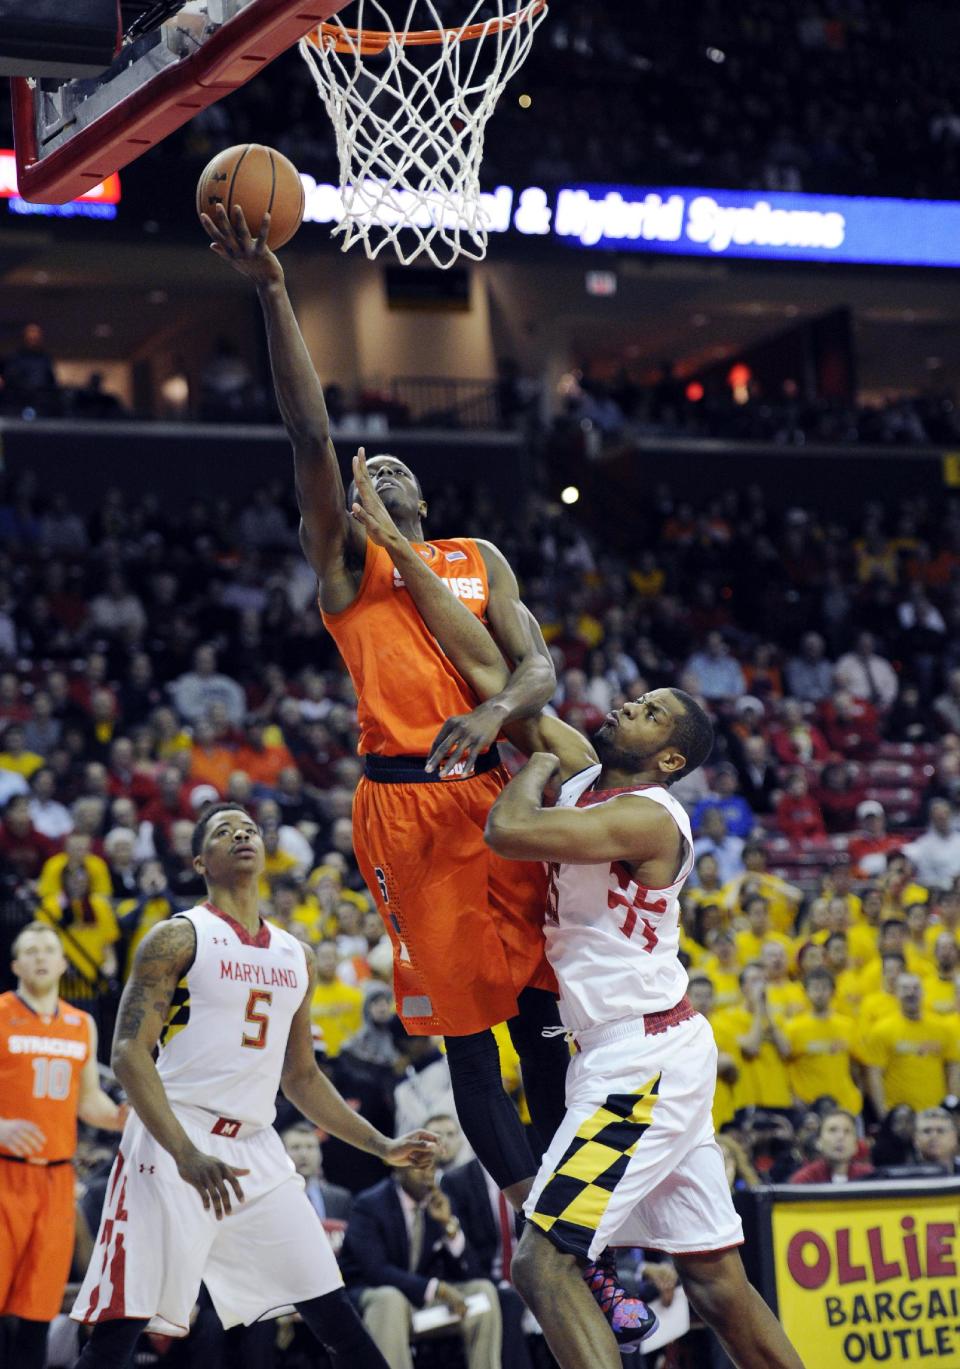 Syracuse forward Jerami Grant, center, goes to the basket against Maryland forward Damonte Dodd, right, and Nick Faust (5) during the first half of an NCAA college basketball game, Monday, Feb. 24, 2014, in College Park, Md. (AP Photo/Nick Wass)